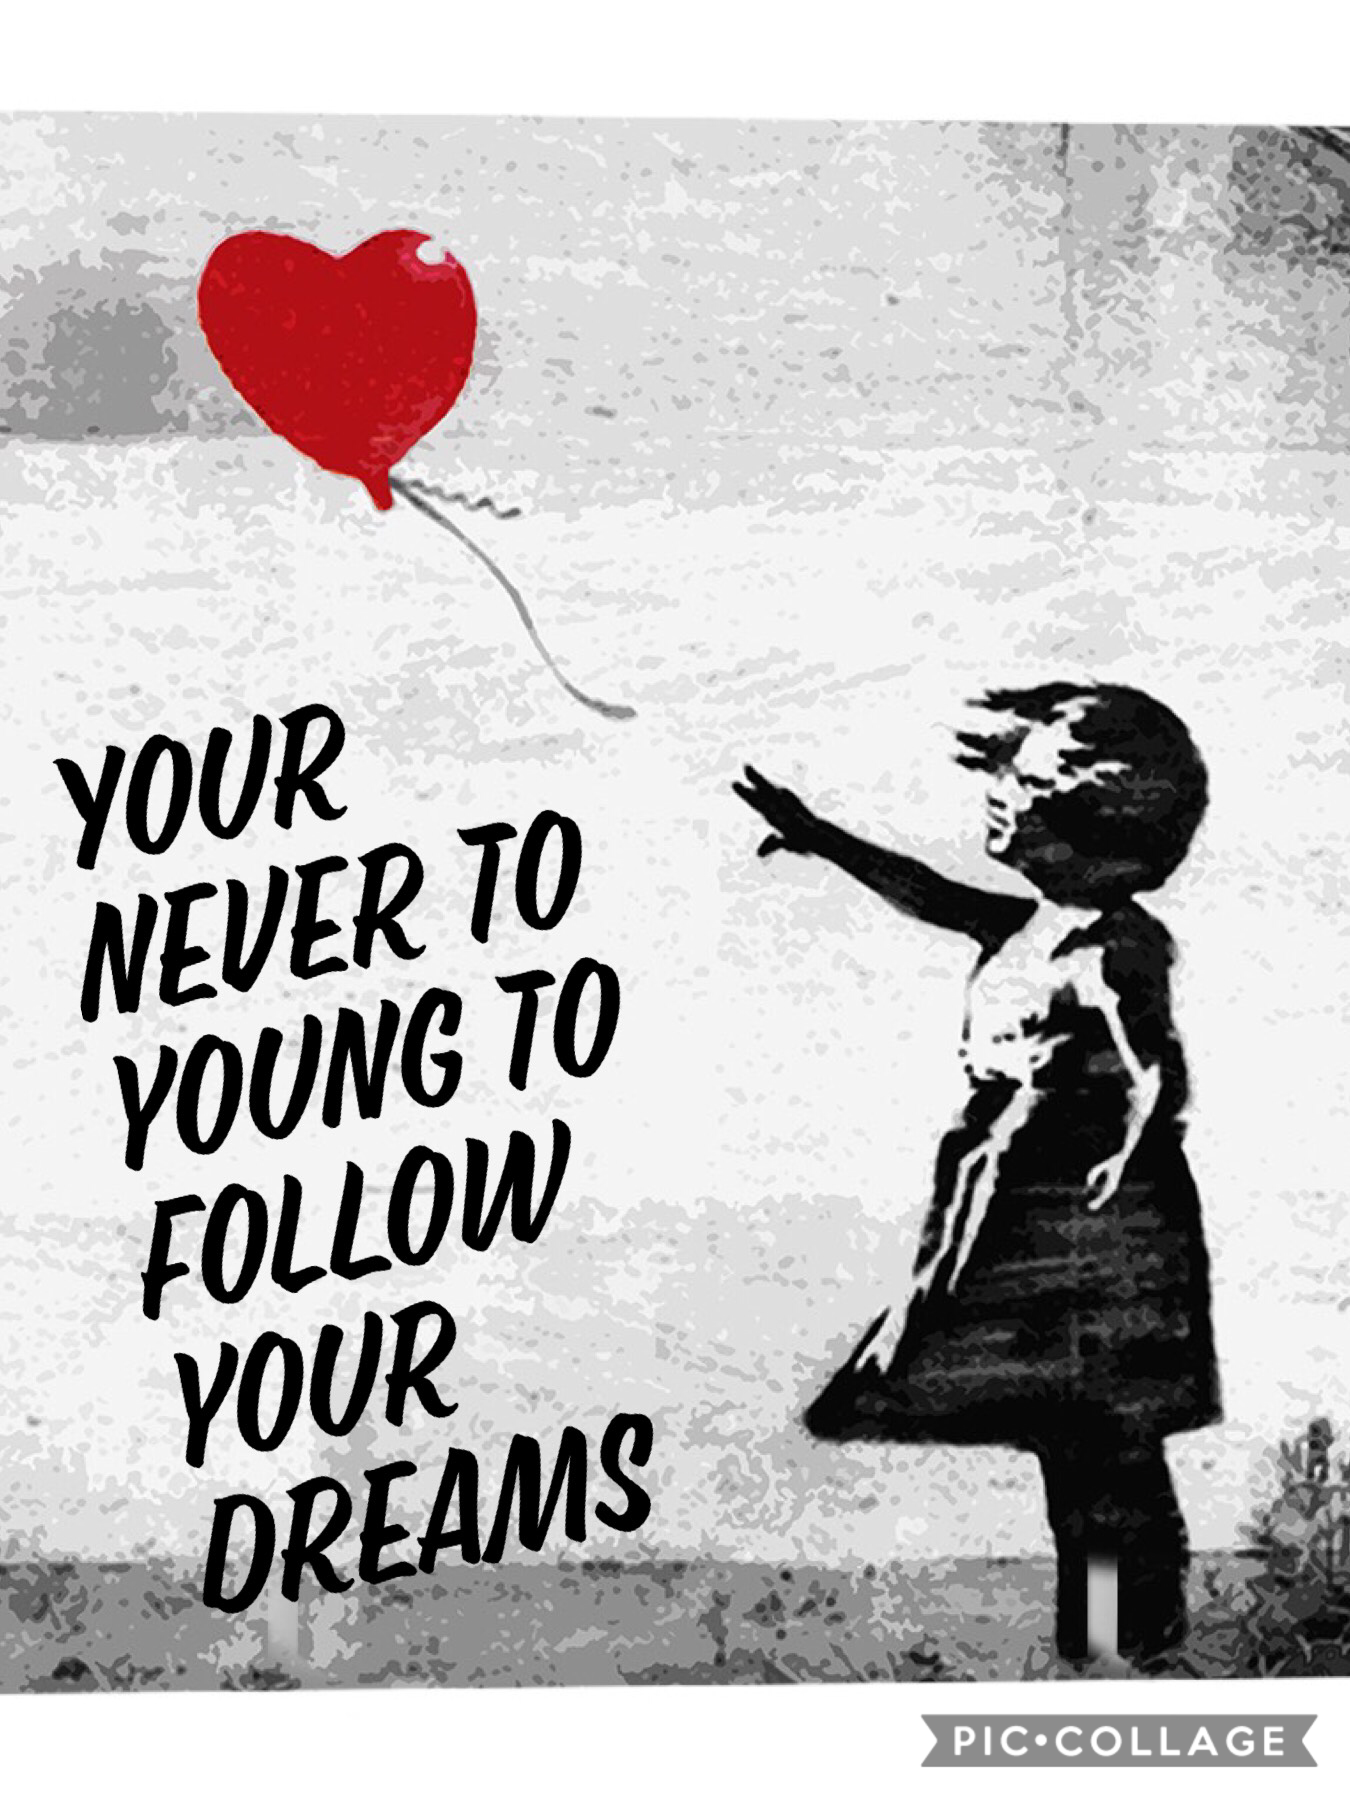 Your never to young to follow your dreams. What’s you dream?